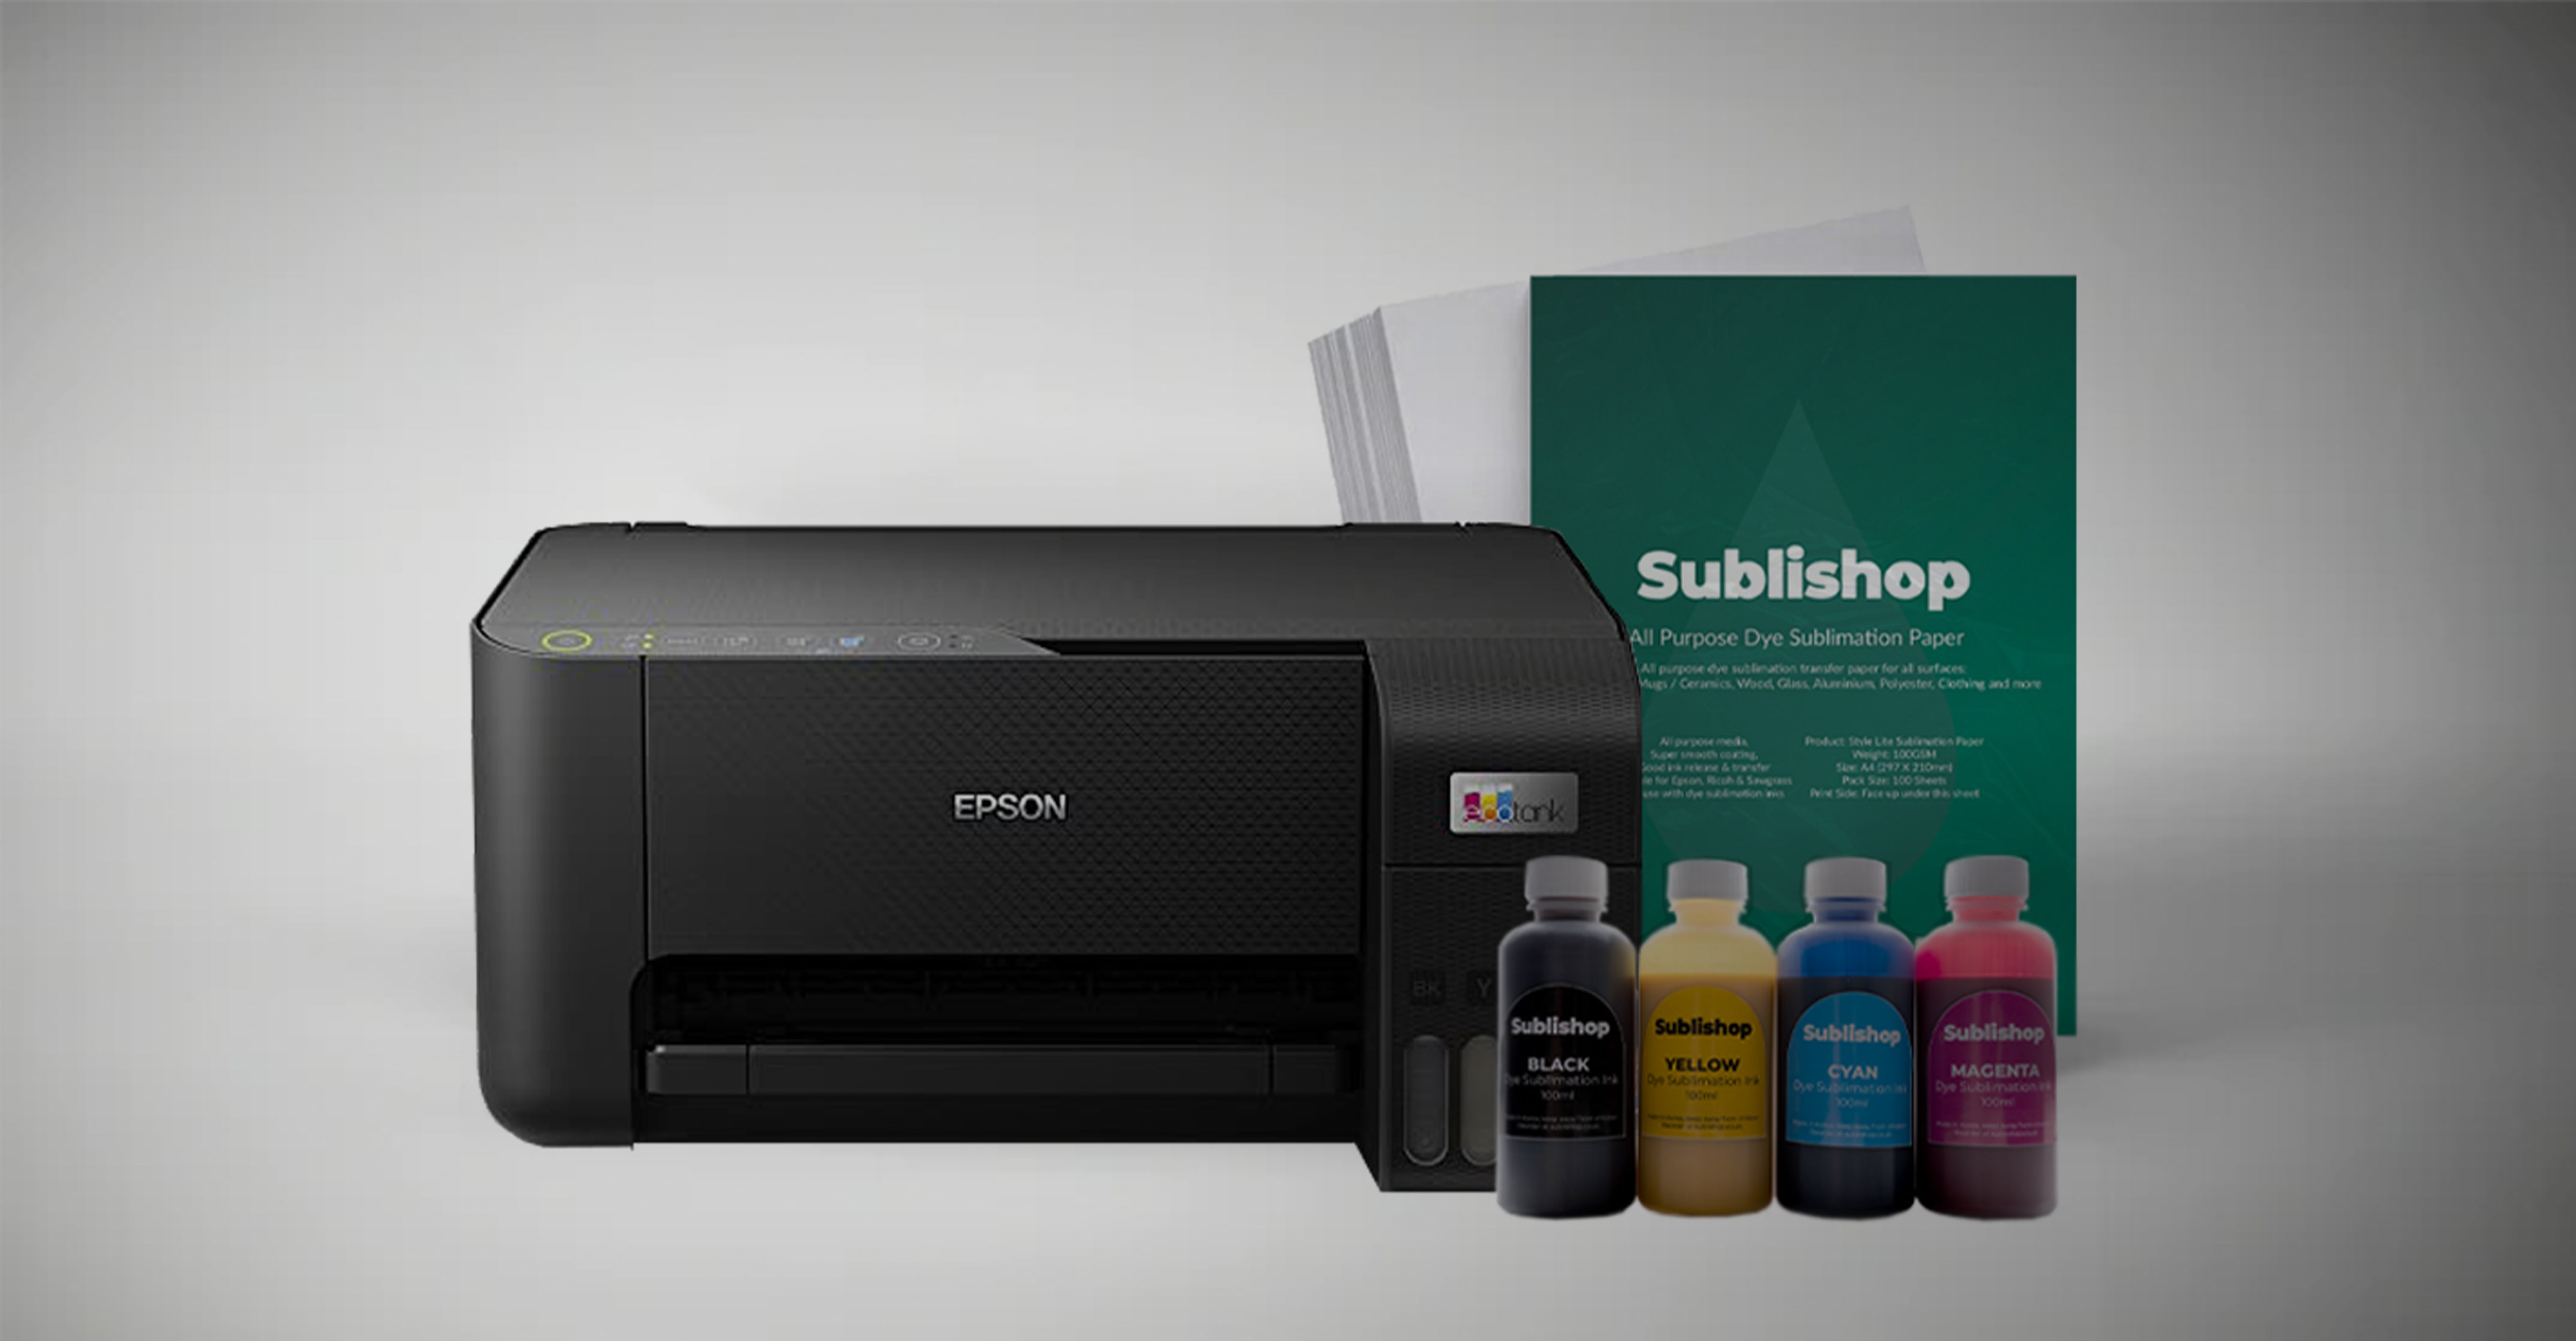 How To Set Up An Epson EcoTank Sublimation Printer On Mac